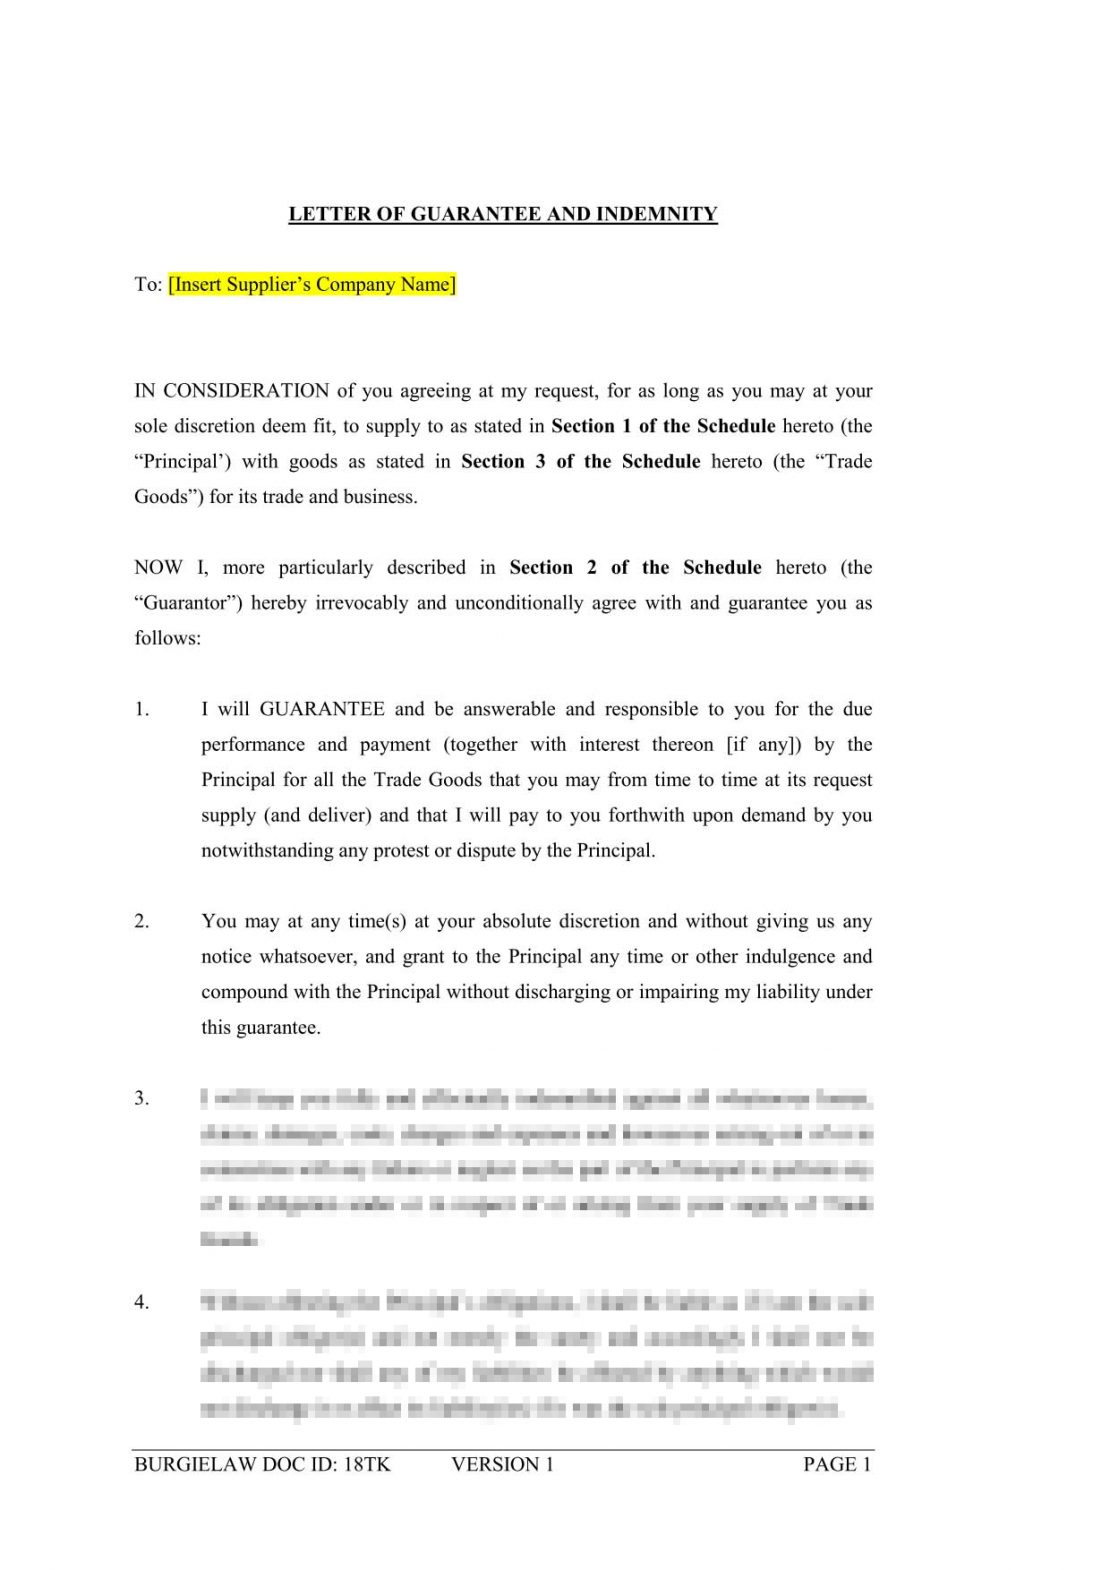 Letter Of Guarantee And Indemnity Supplier Template Burgielaw 3006